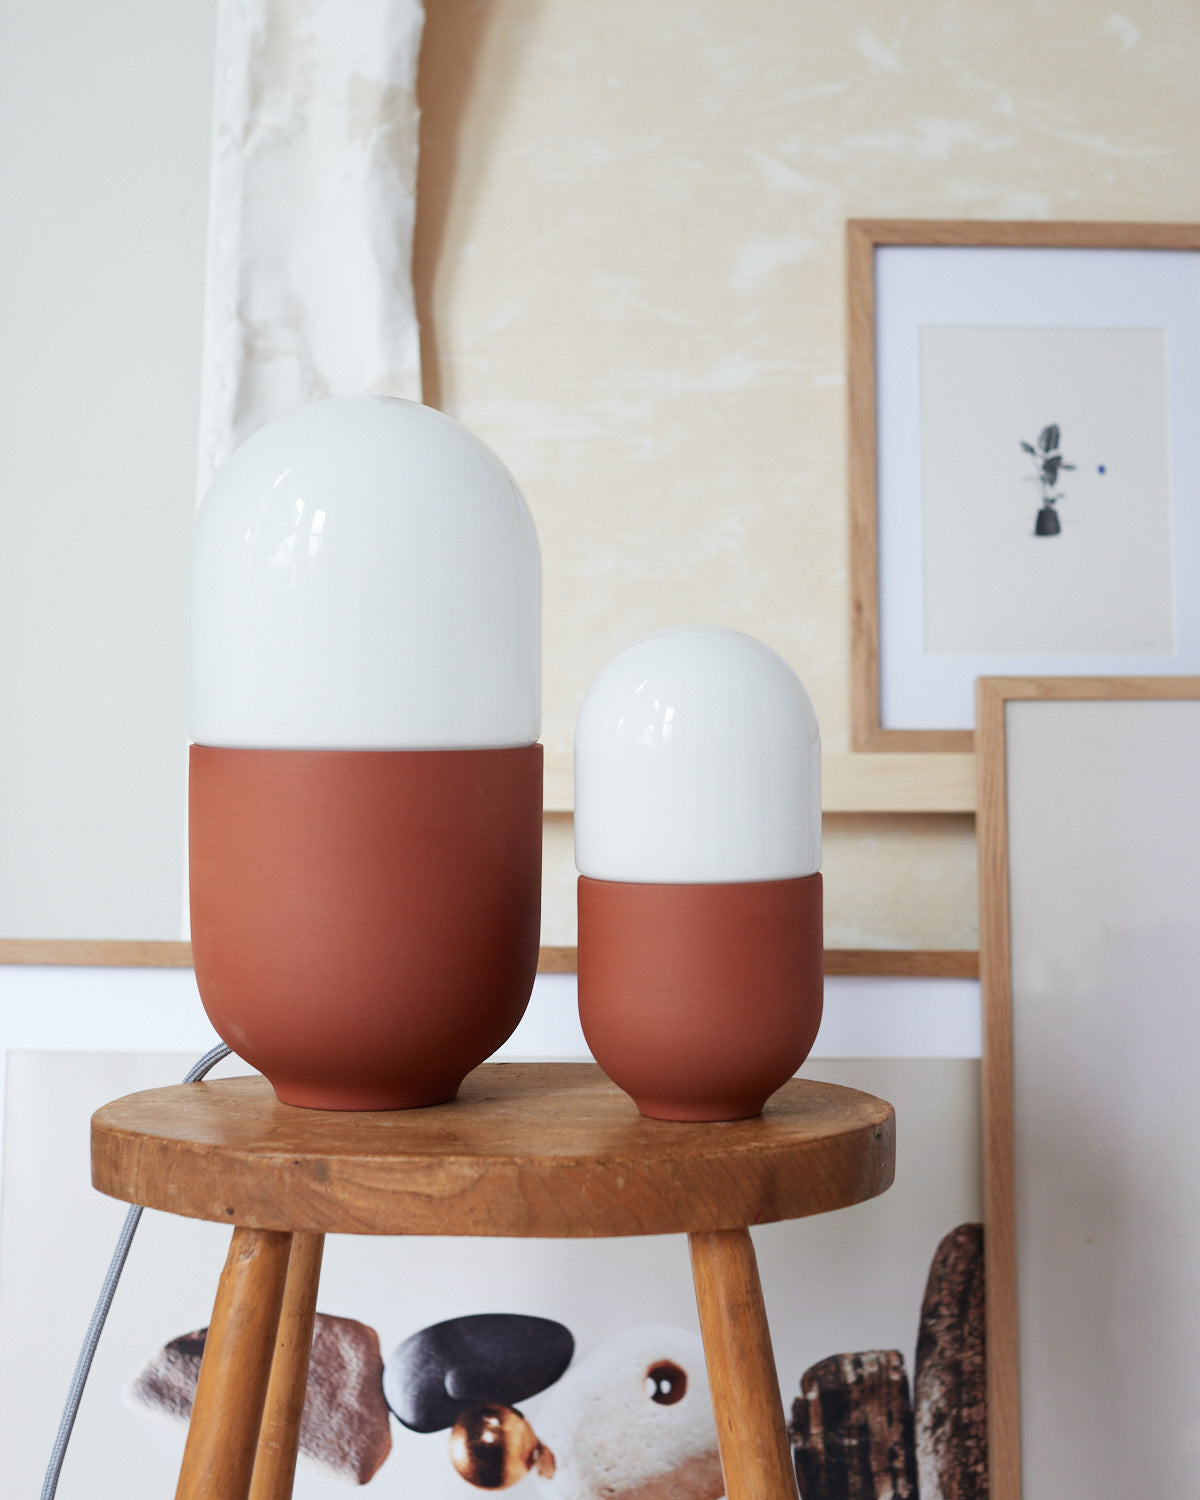 Duo Small Terracotta Table Lamp In Terracotta